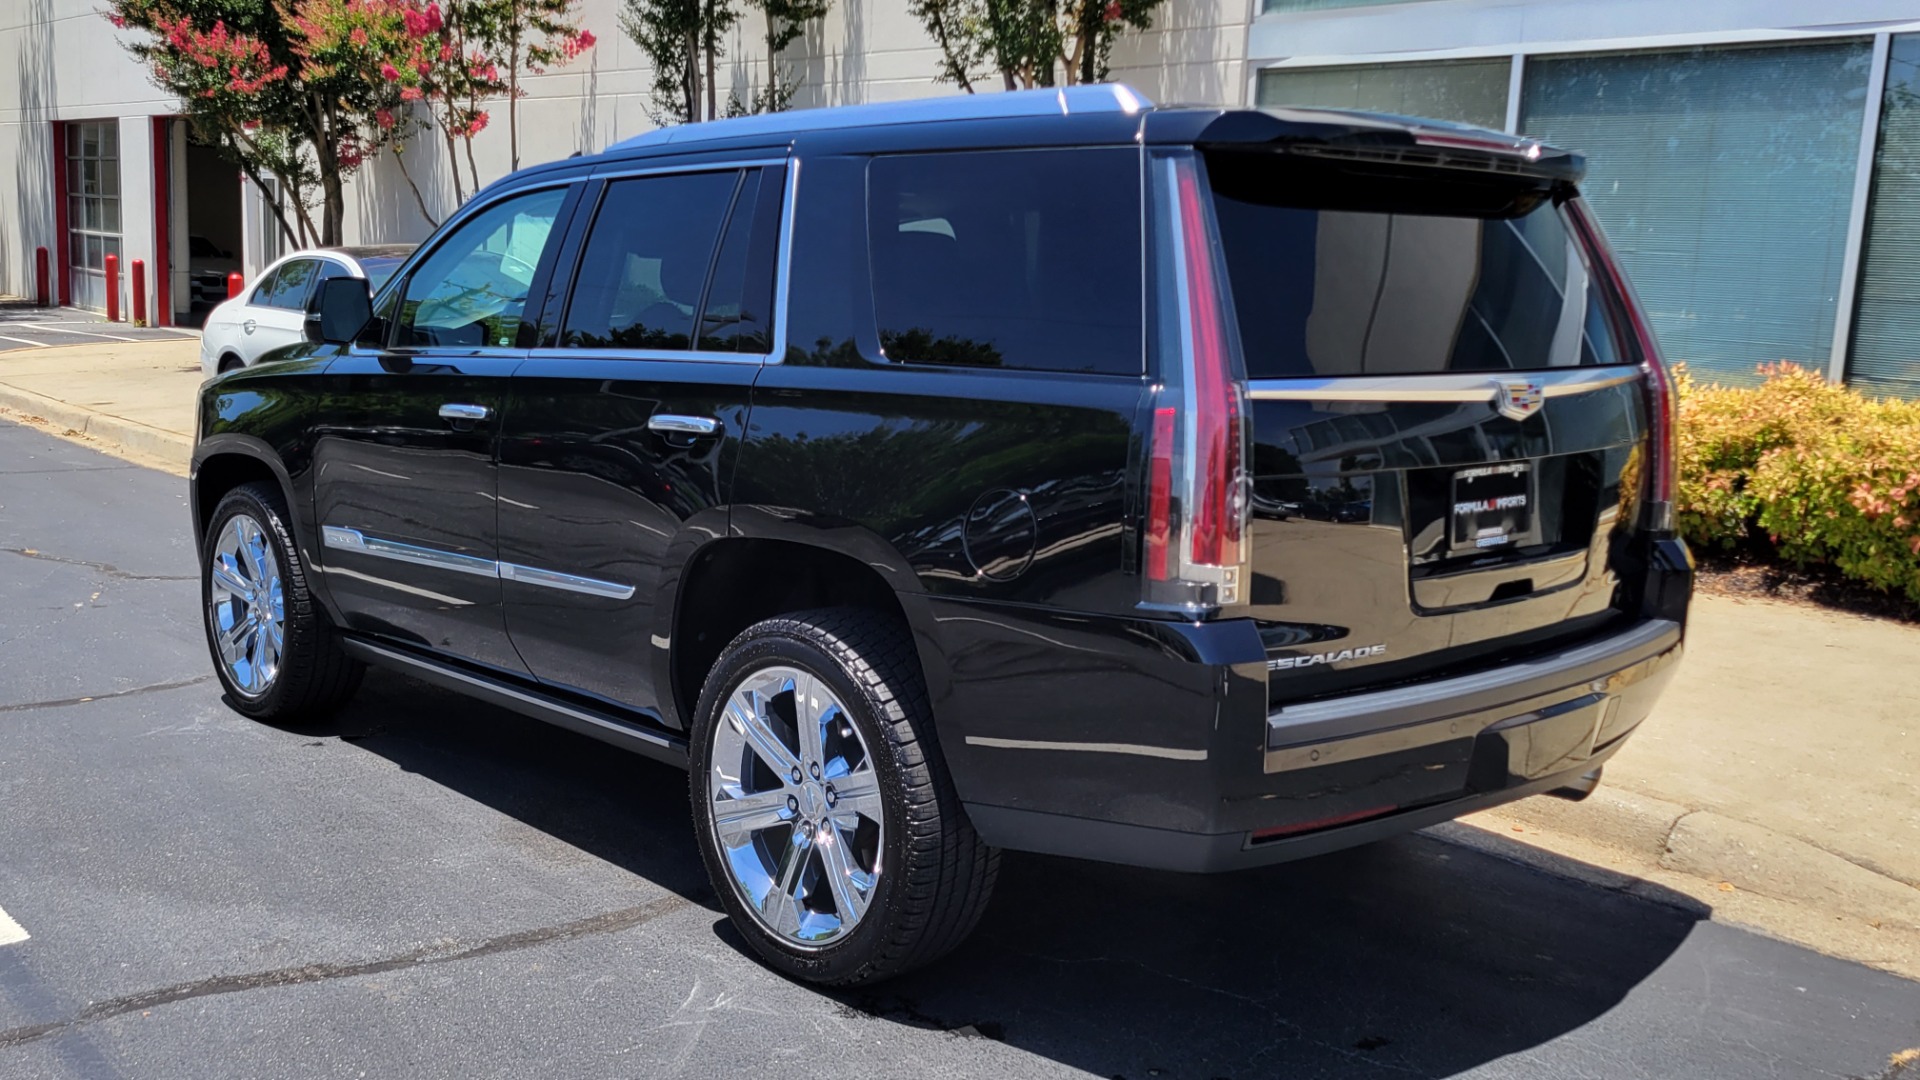 Used 2016 Cadillac ESCALADE PREMIUM COLLECTION / 6.2L / 4X4 / NAV / DVD / SUNROOF / 3-ROW for sale $58,995 at Formula Imports in Charlotte NC 28227 4